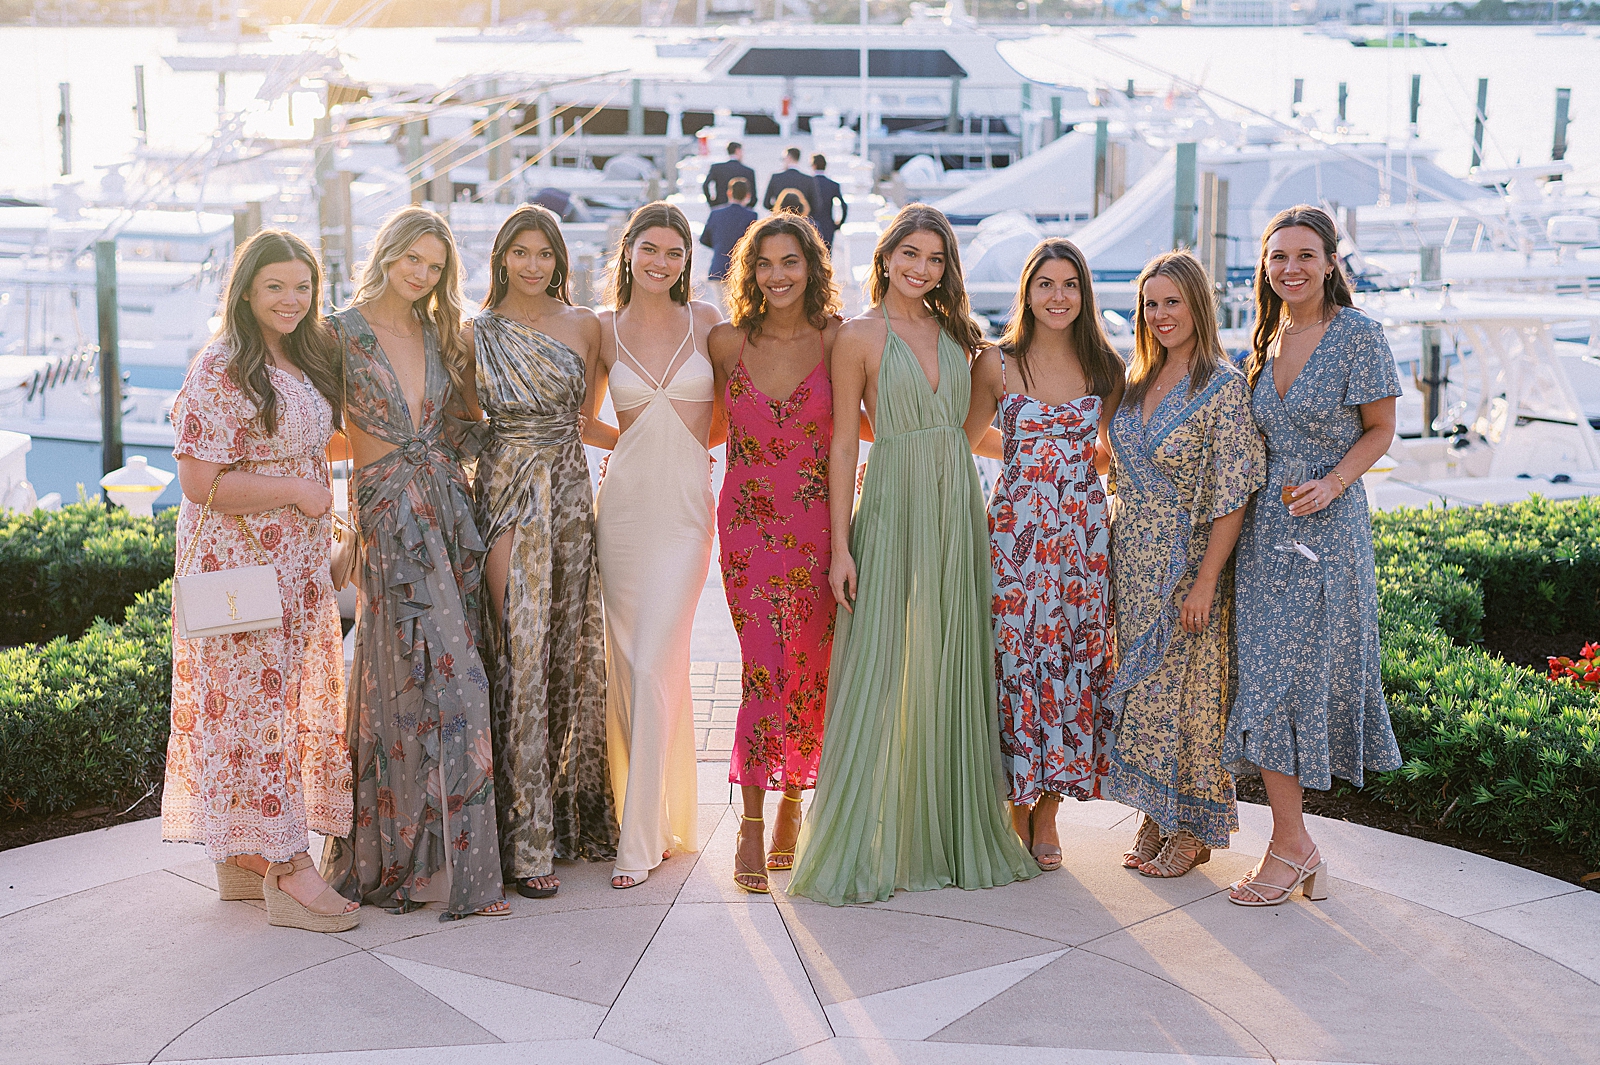 Bride and Bridesmaids dressed up for Rehearsal dinner